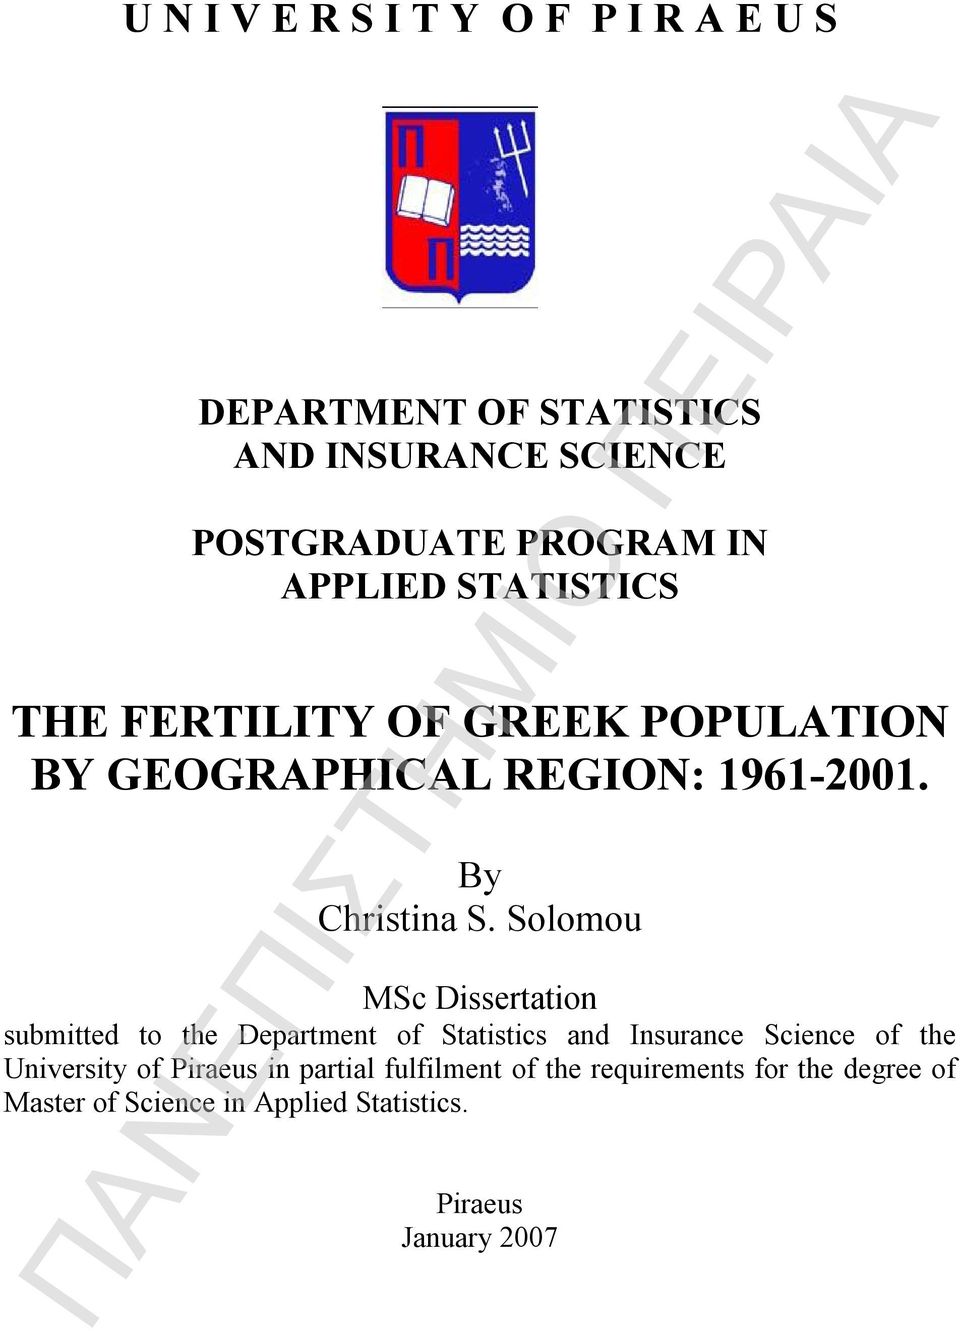 Solomou MSc Dissertation submitted to the Department of Statistics and Insurance Science of the University of